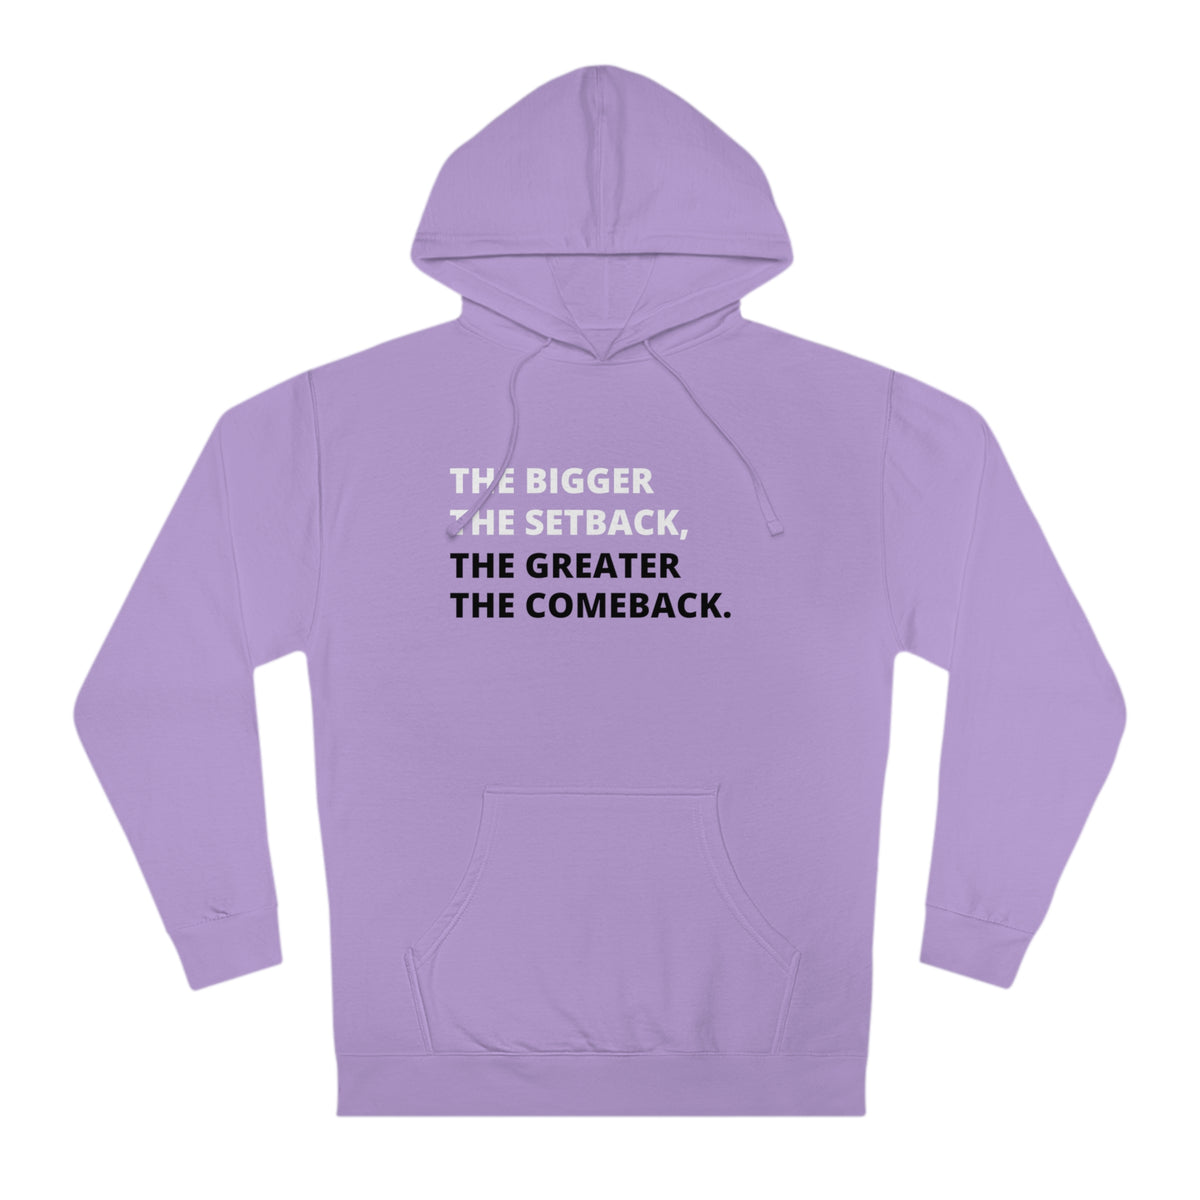 The Greater The Comeback Adult Hooded Sweatshirt